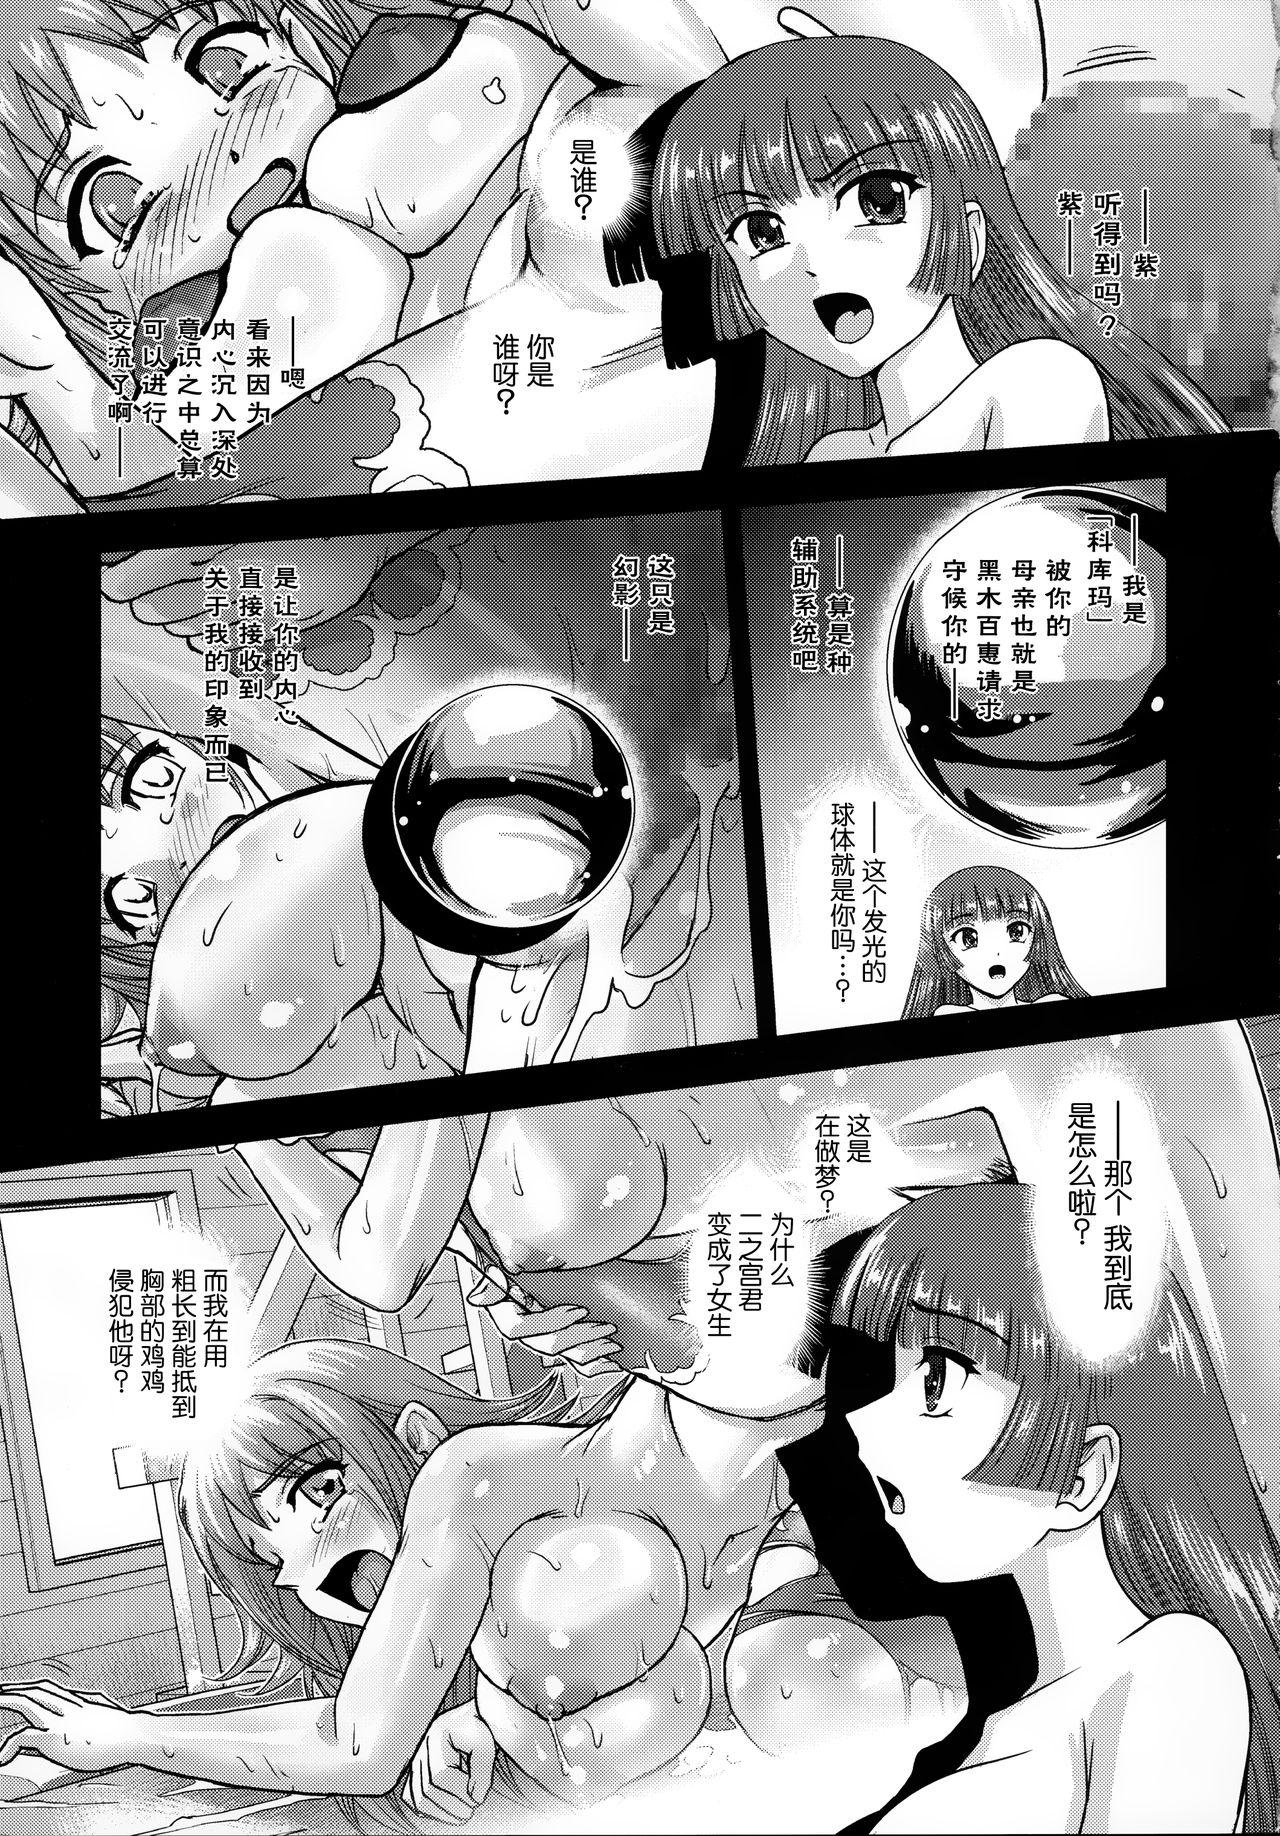 Tgirl (C95) [Behind Moon (Dulce-Q)] DR:II ep.7 ~Dulce Report~ | 达西报告II Ep.7 [Chinese] [鬼畜王汉化组] - Original Periscope - Page 5